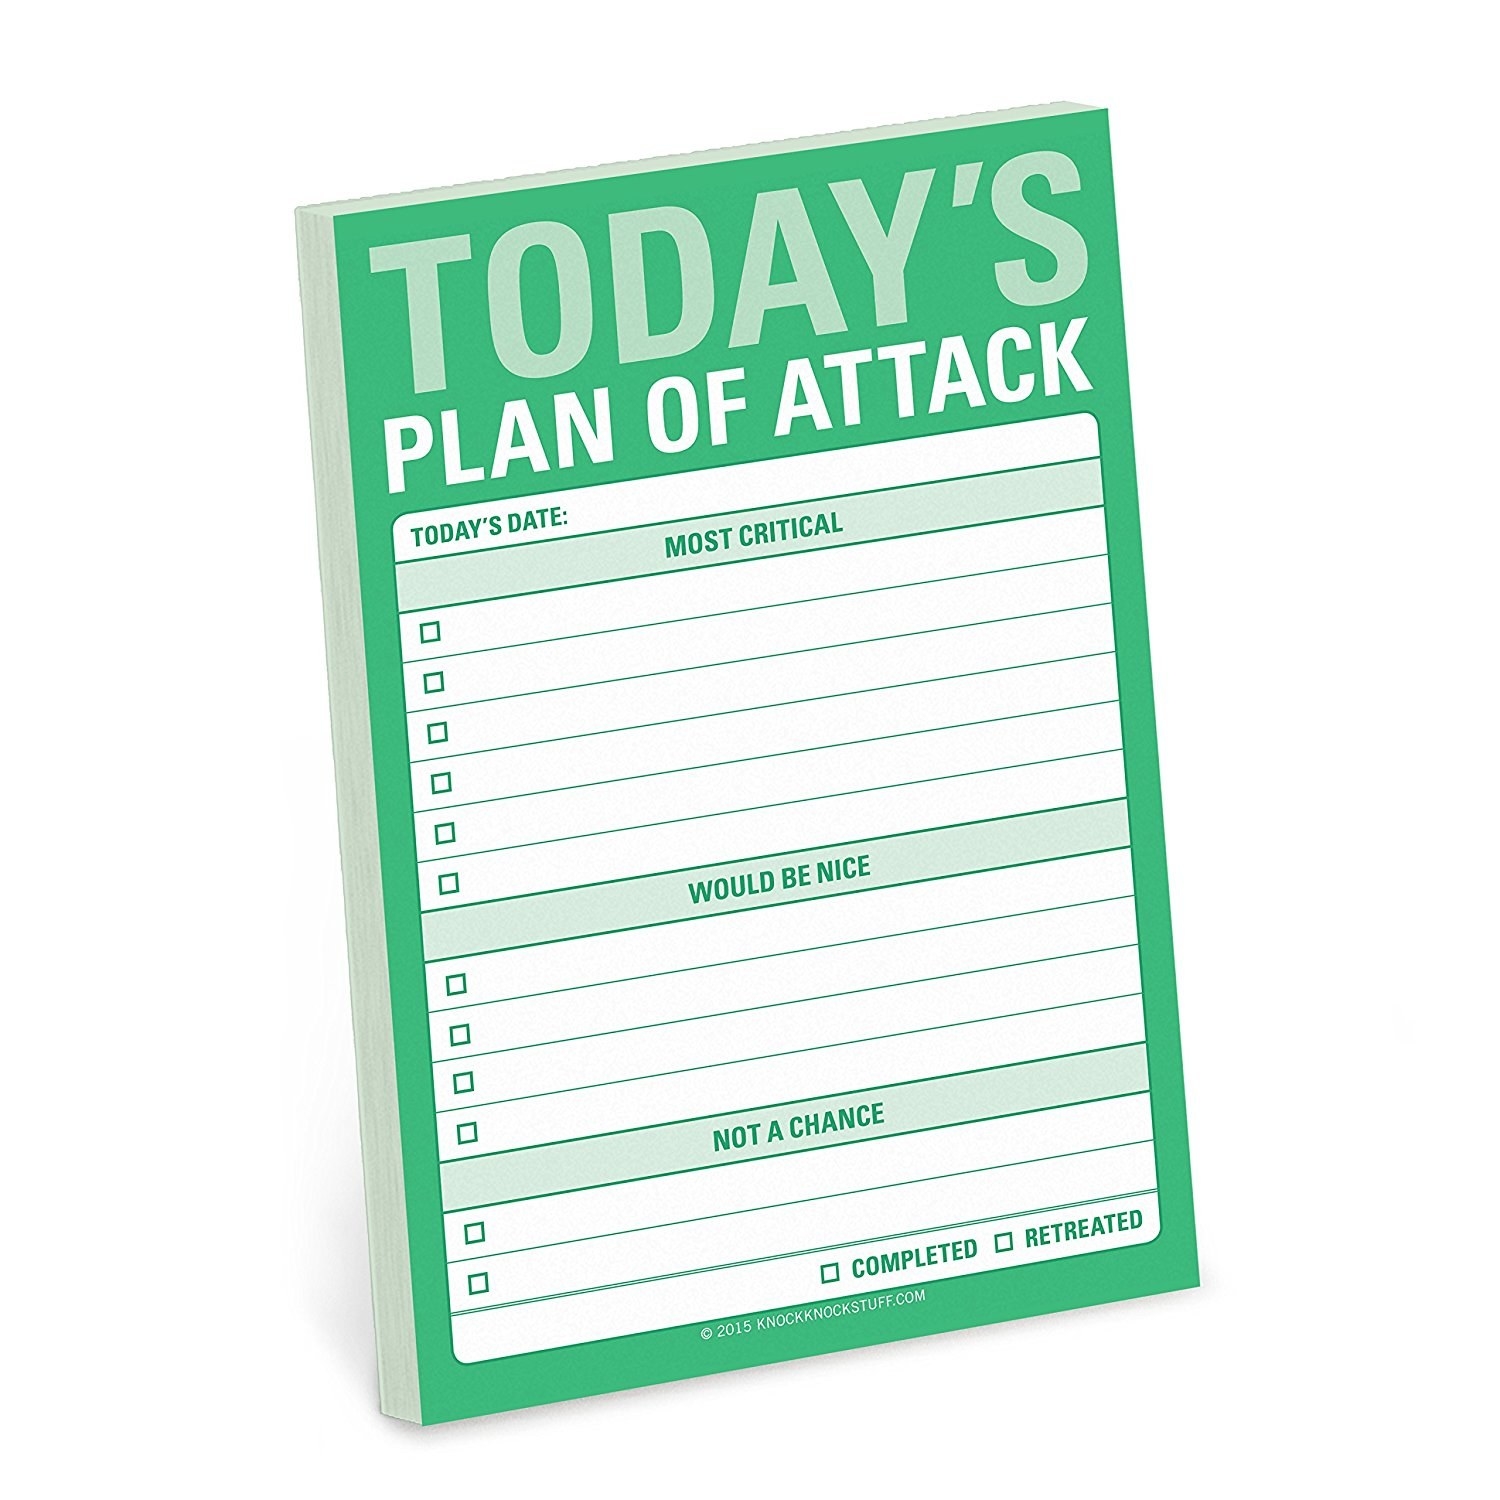 The green notepad with &quot;today&#x27;s plan of attack&quot; at the top, with sections for most critical, would be nice, and not a chance